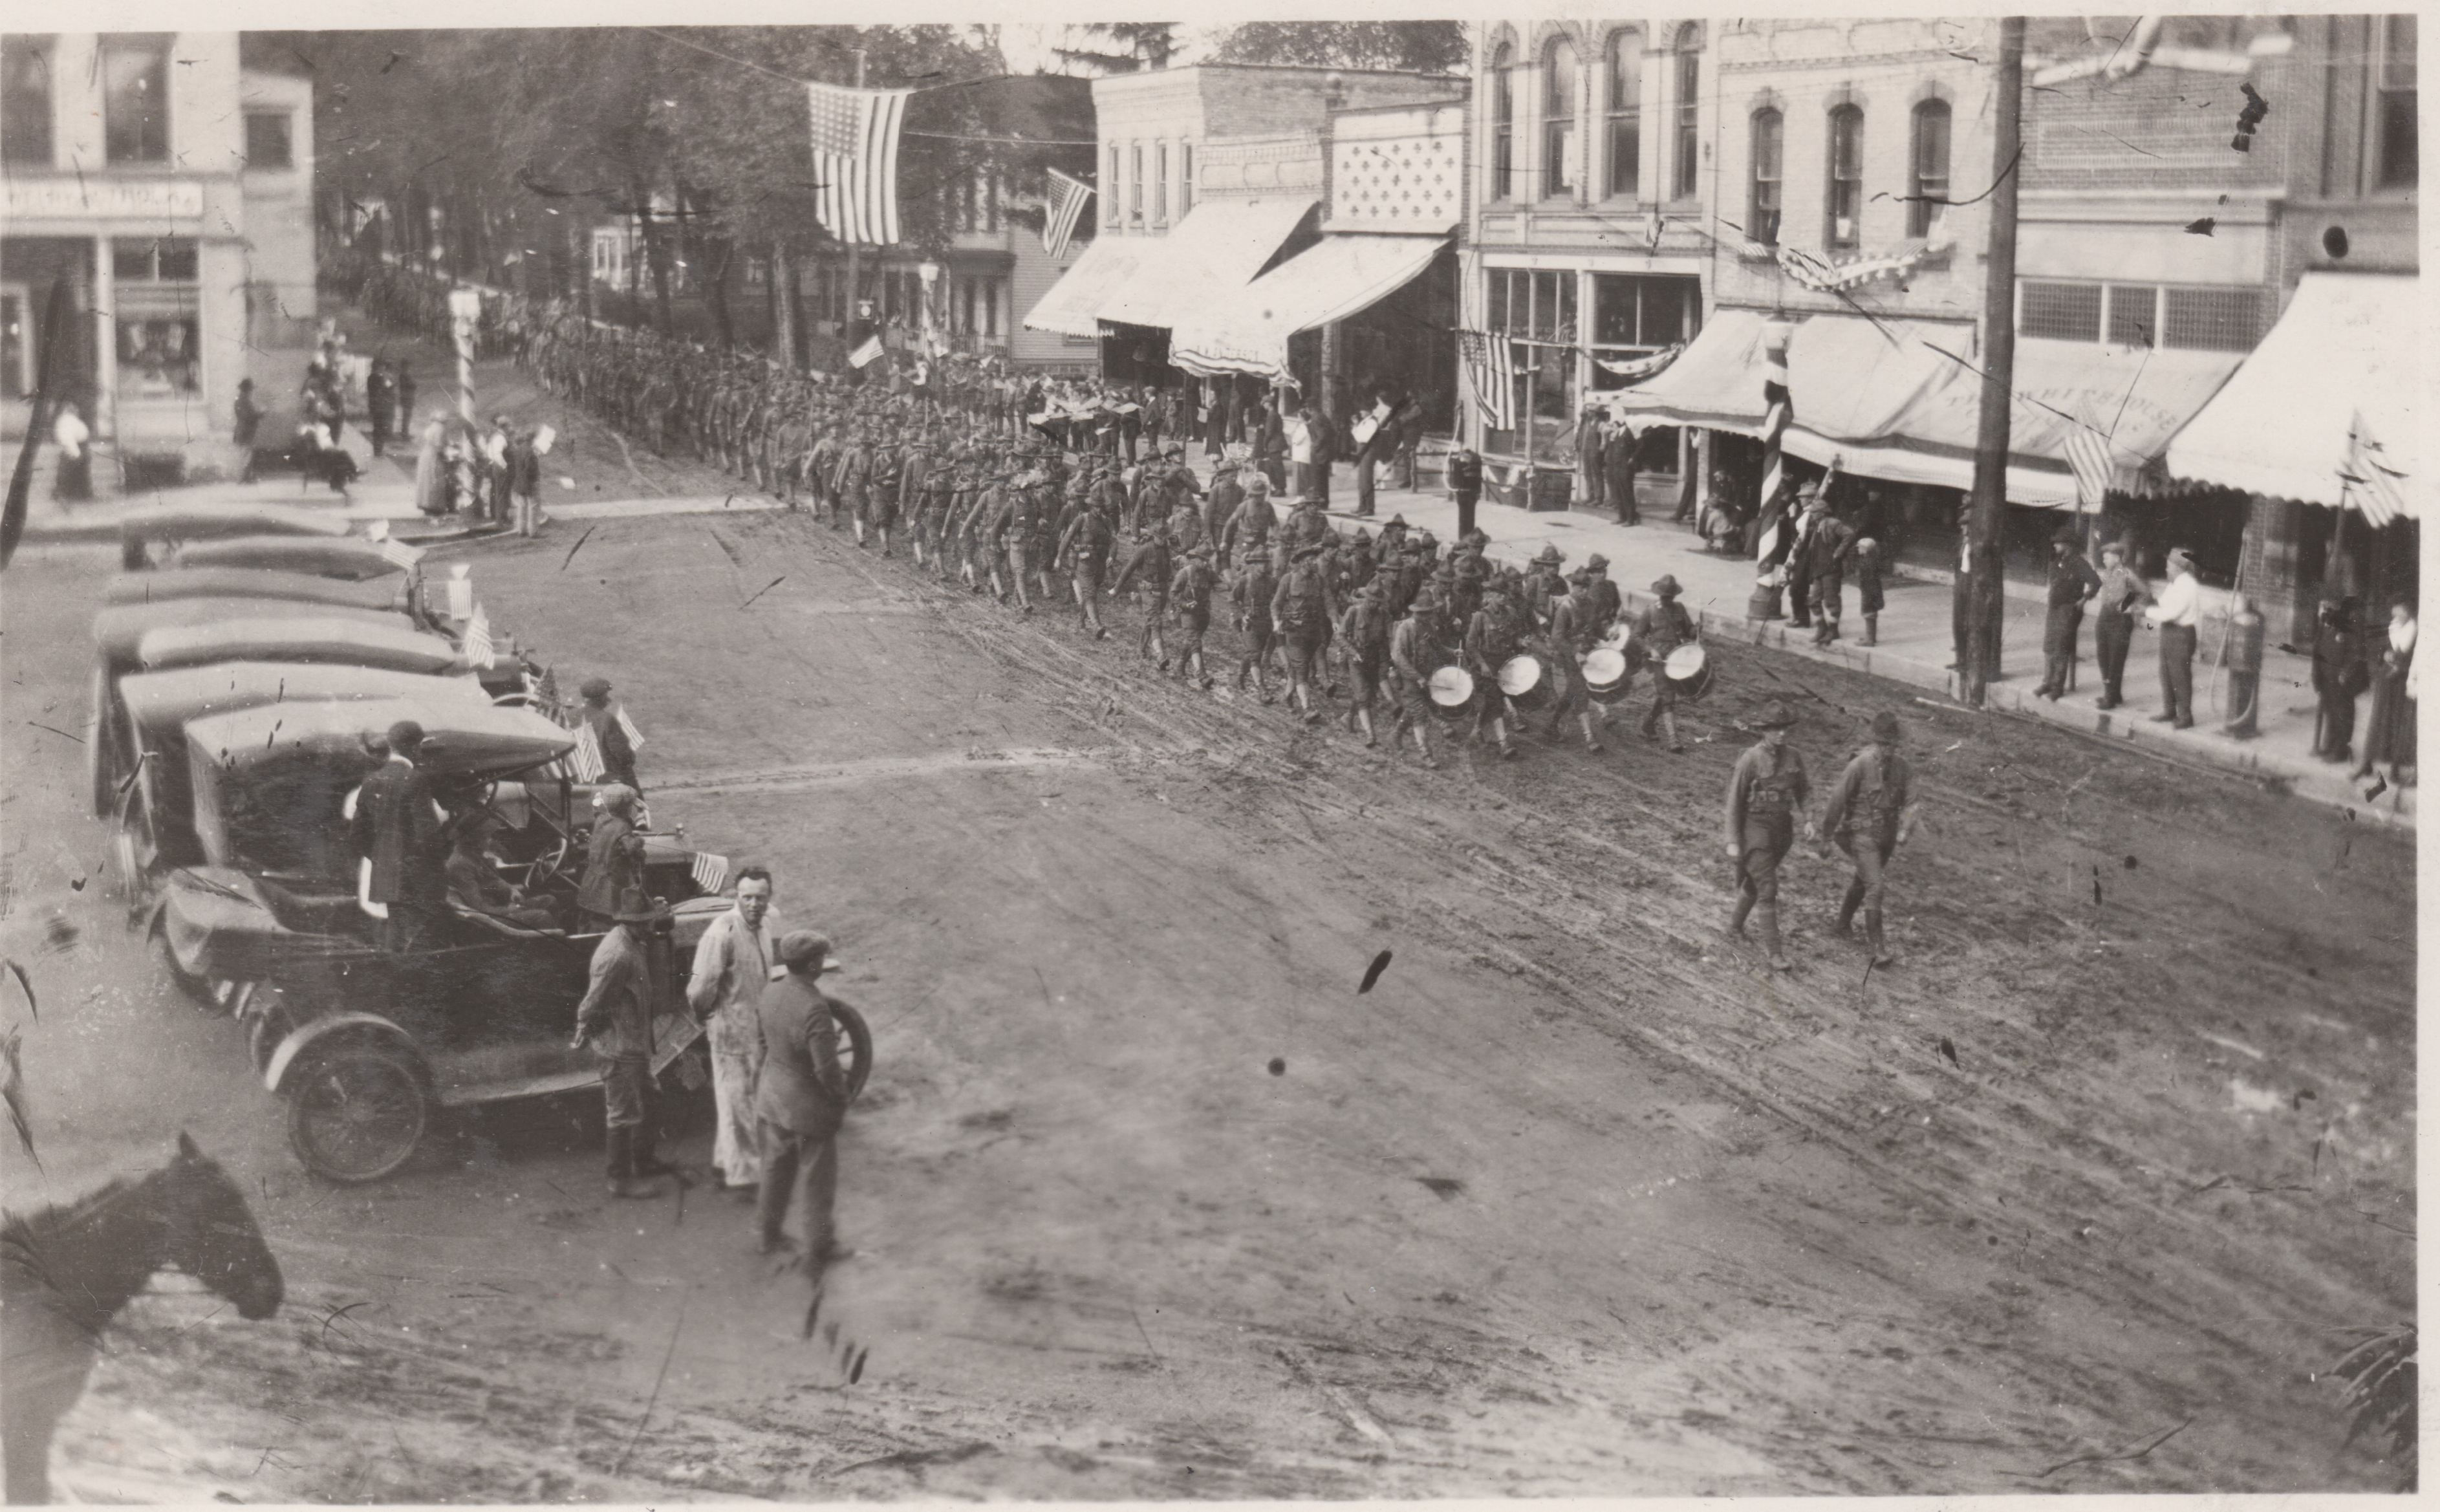 Troops marched through town in 1918.